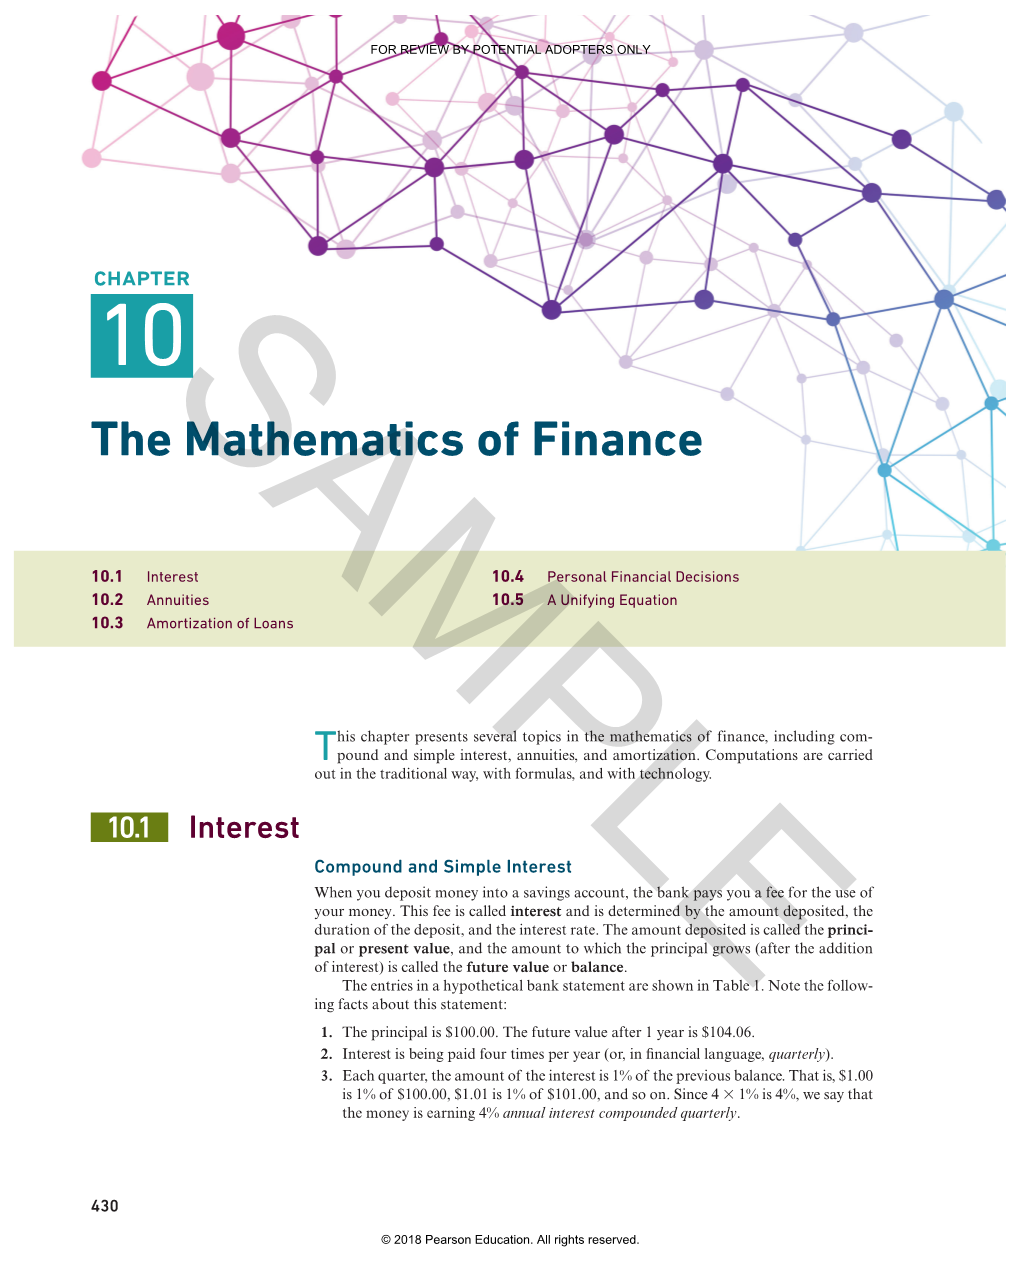 The Mathematics of Finance, Including Com- Tpound and Simple Interest, Annuities, and Amortization